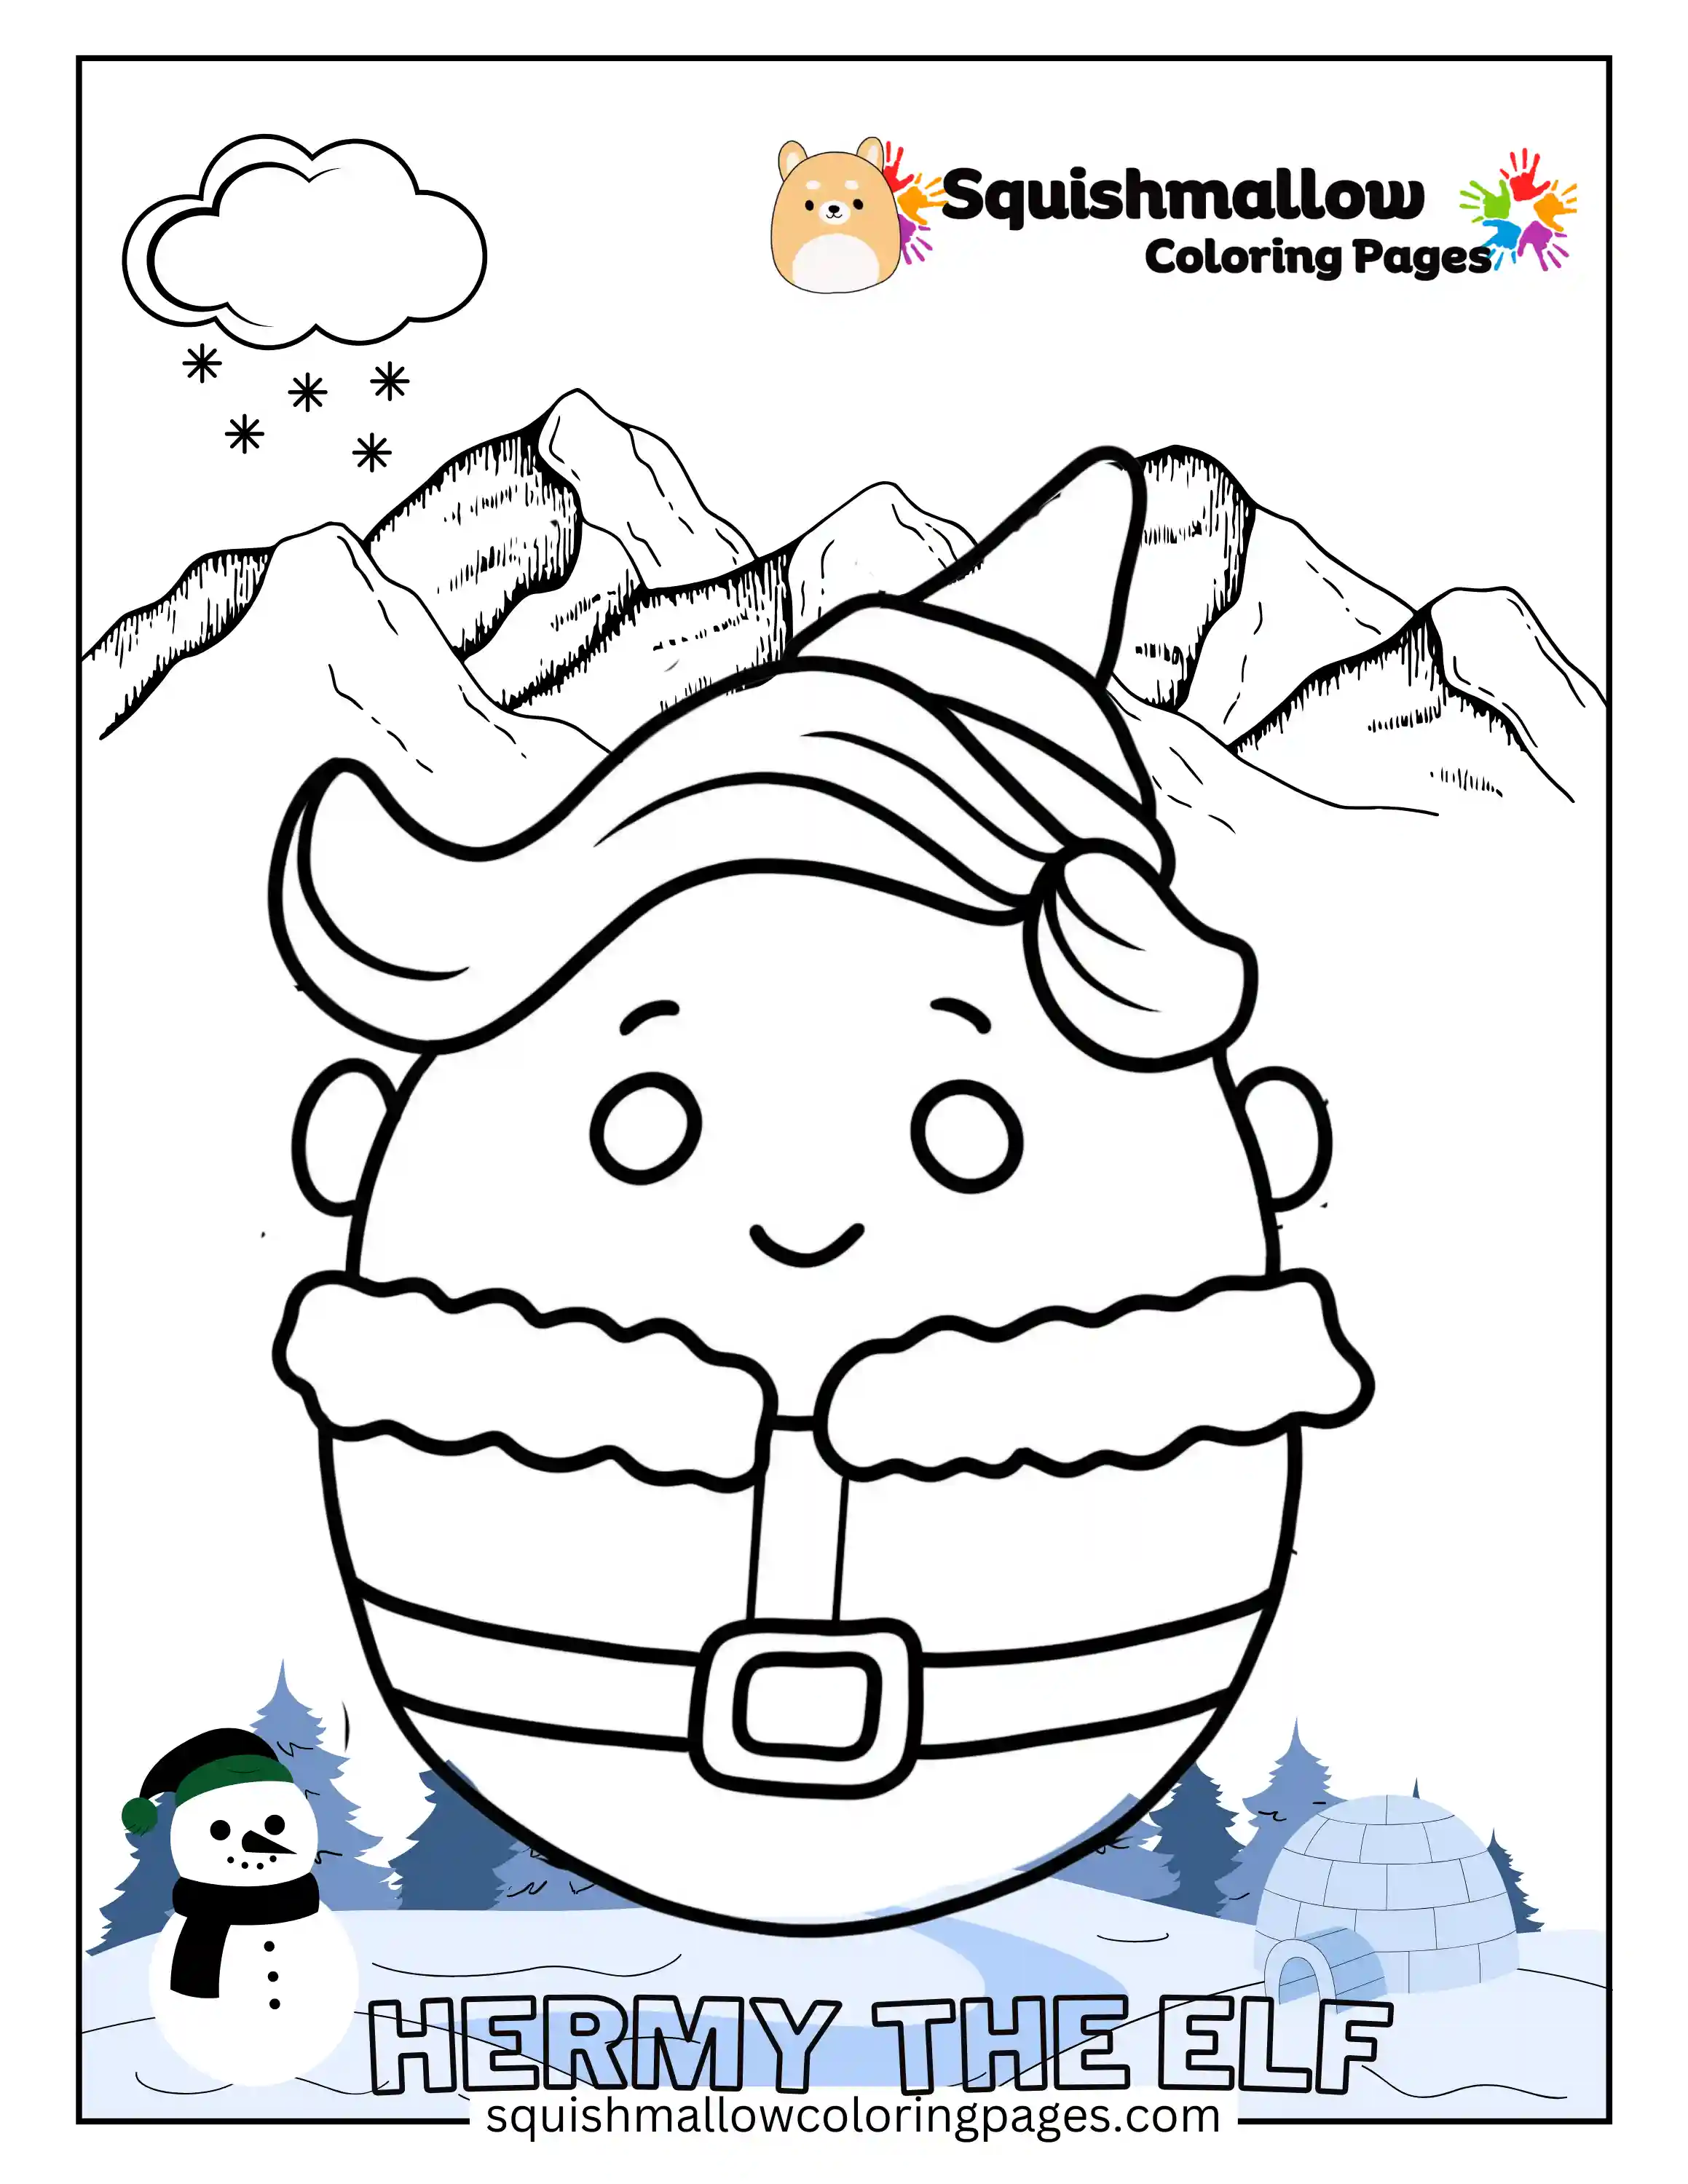 Hermy The Elf Squishmallow Coloring Pages